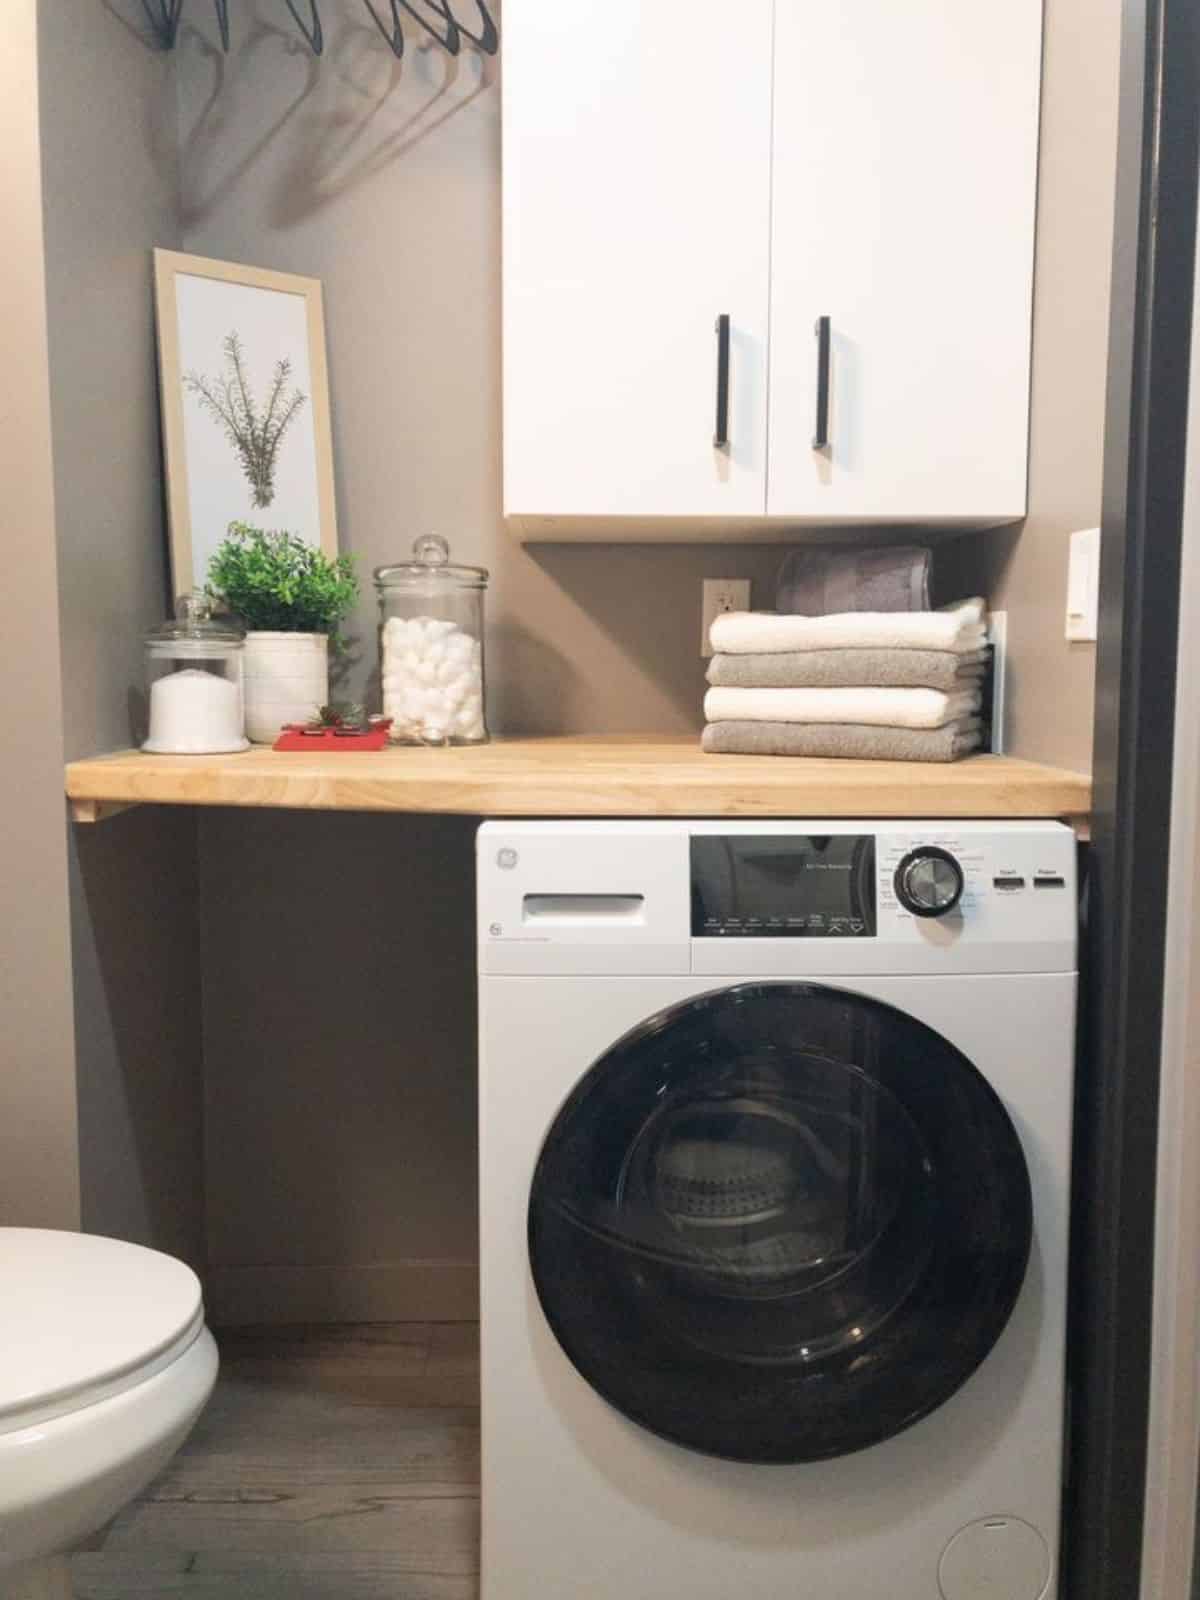 Washer dryer combo with tankless hot water is also installed in bathroom of Luxurious & Stunning Tiny Home